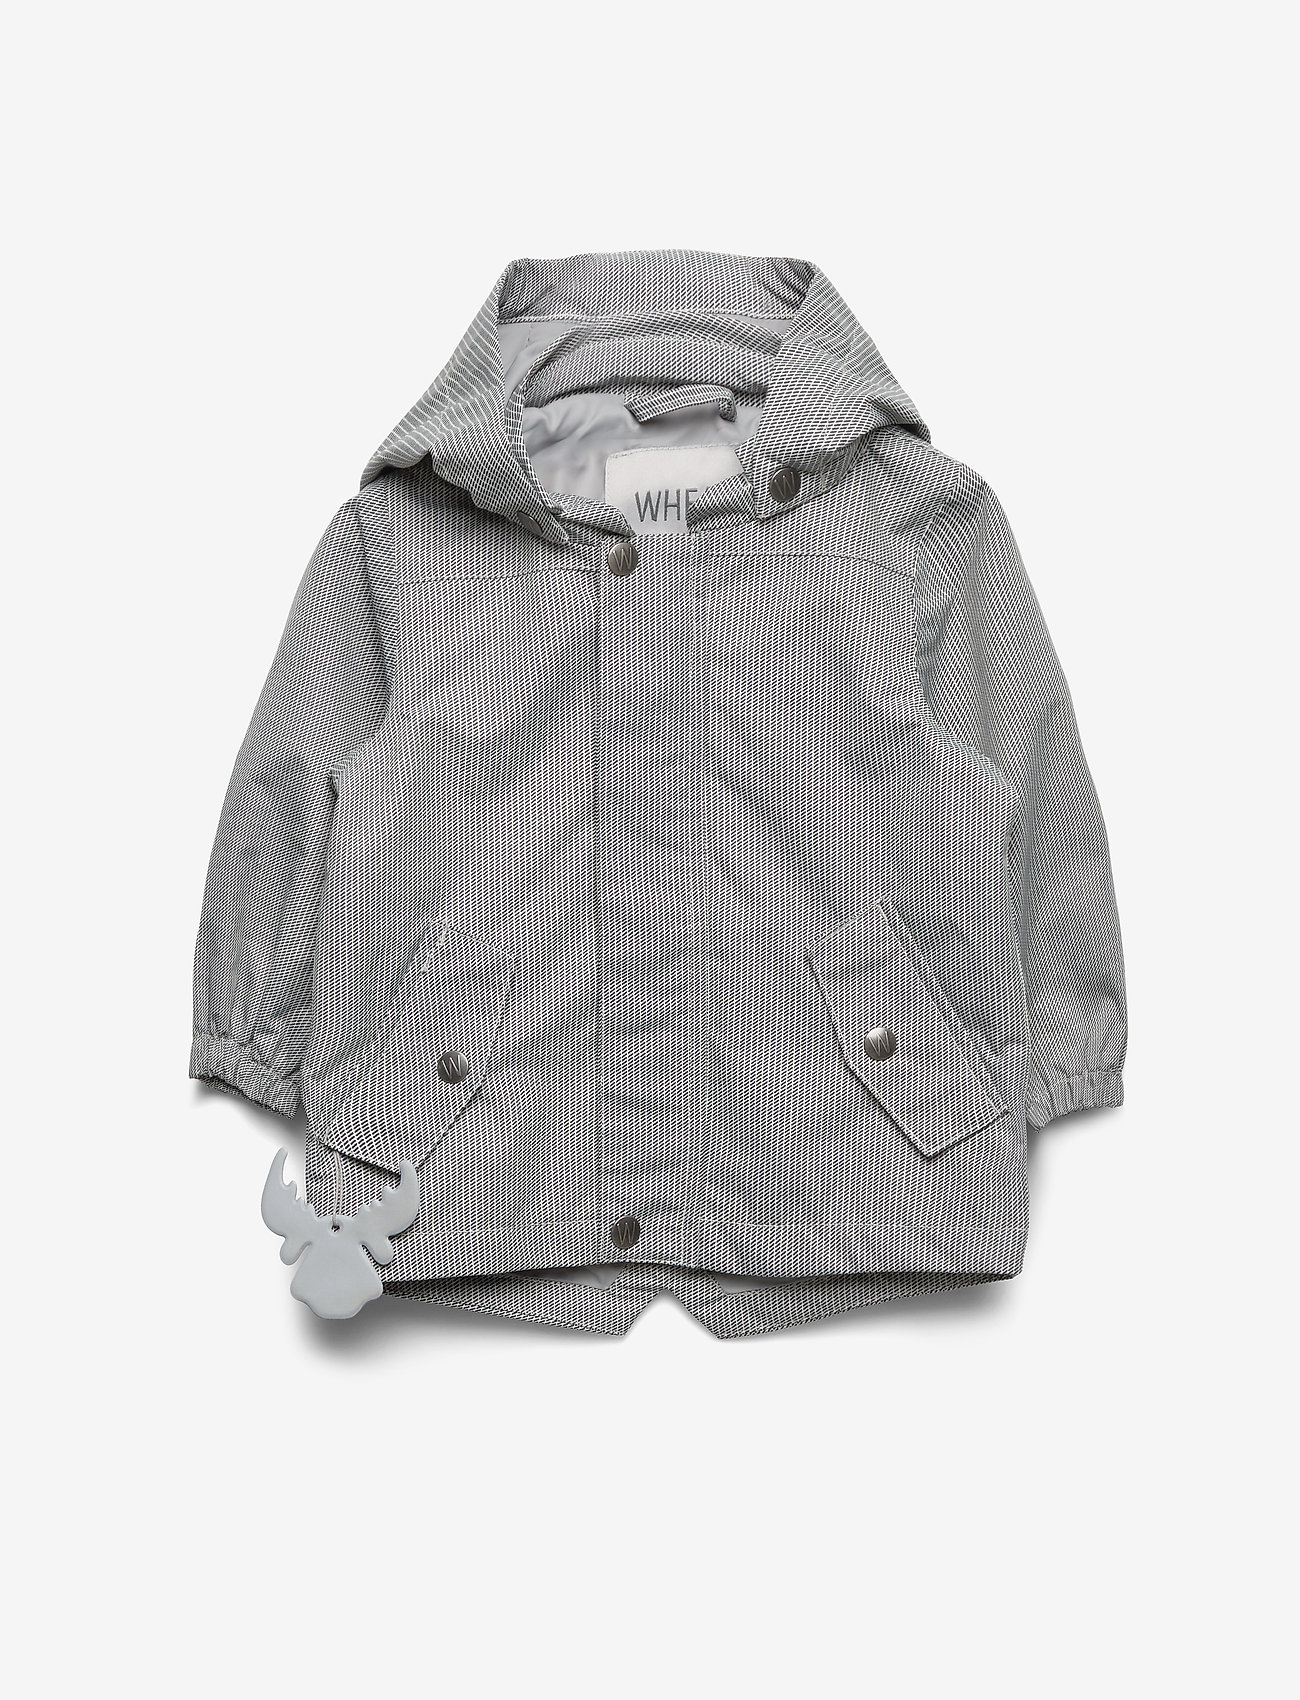 Wheat Jacket Valter Tech (Moon Stripe), (36.11 €) Large selection of outlet-styles | Booztlet.com